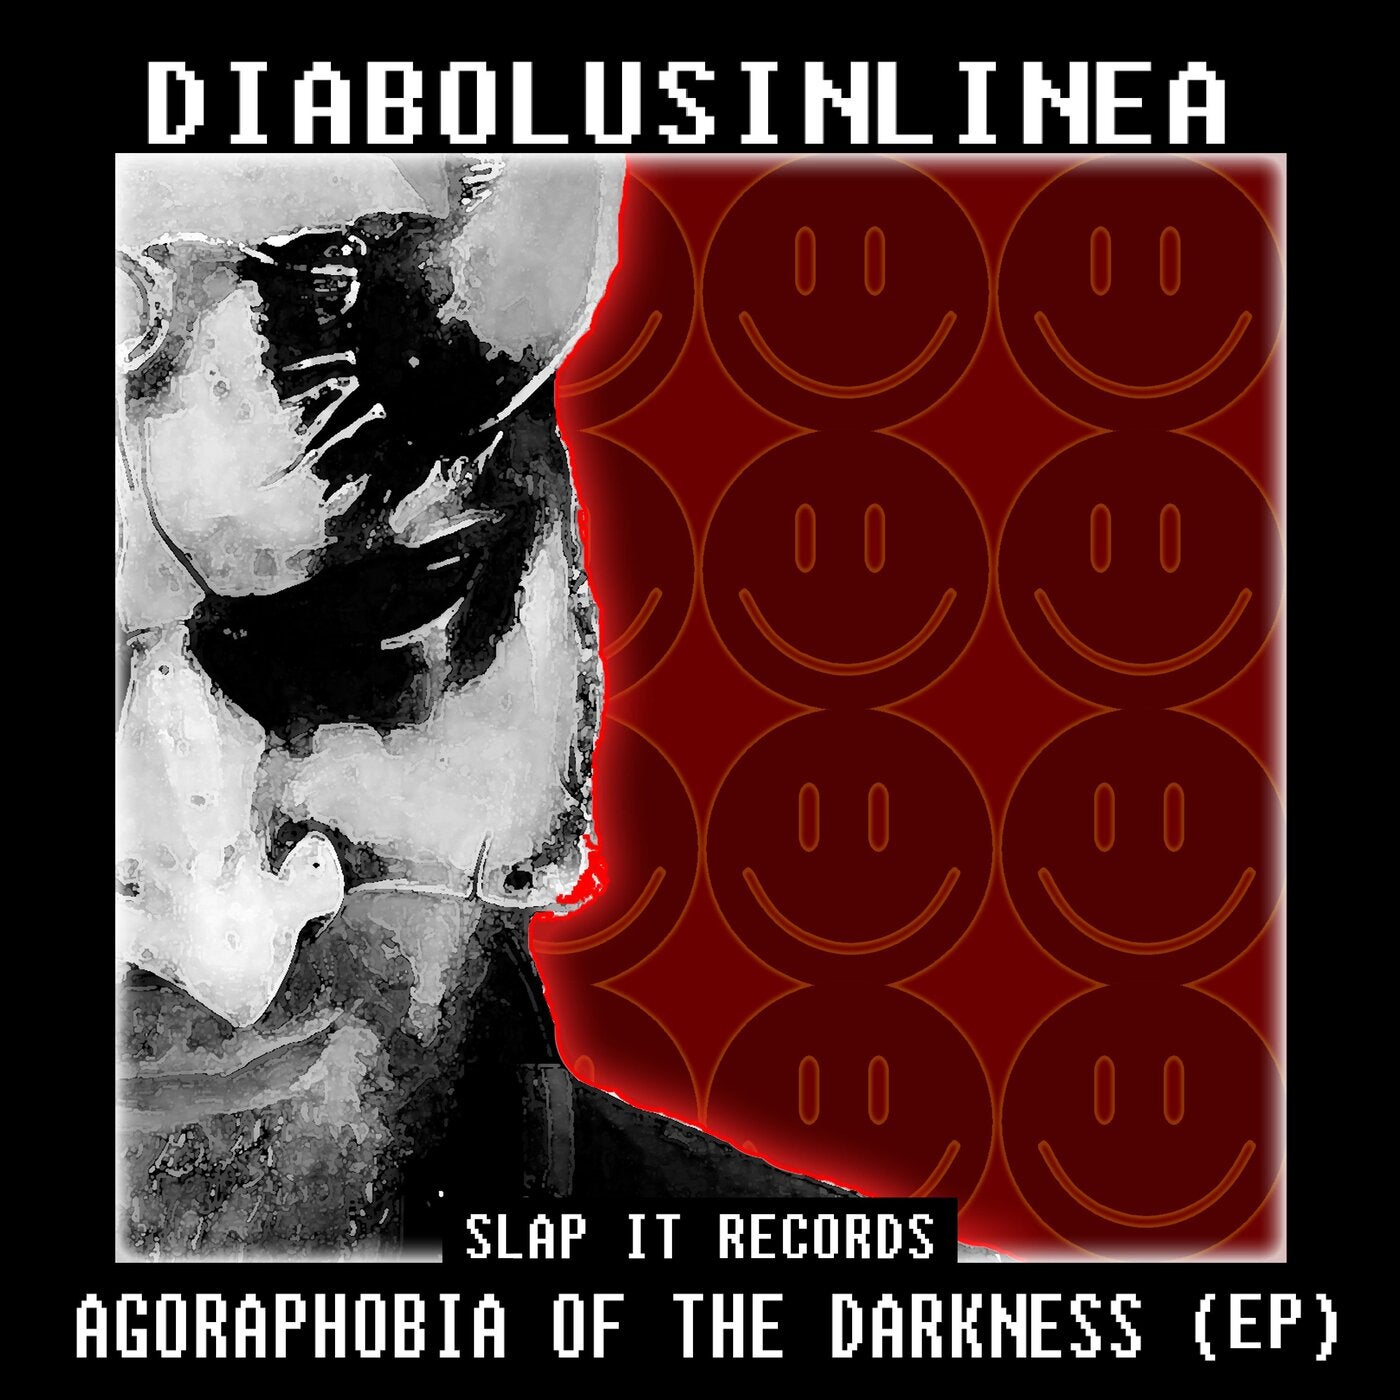 Agoraphobia of The Darkness